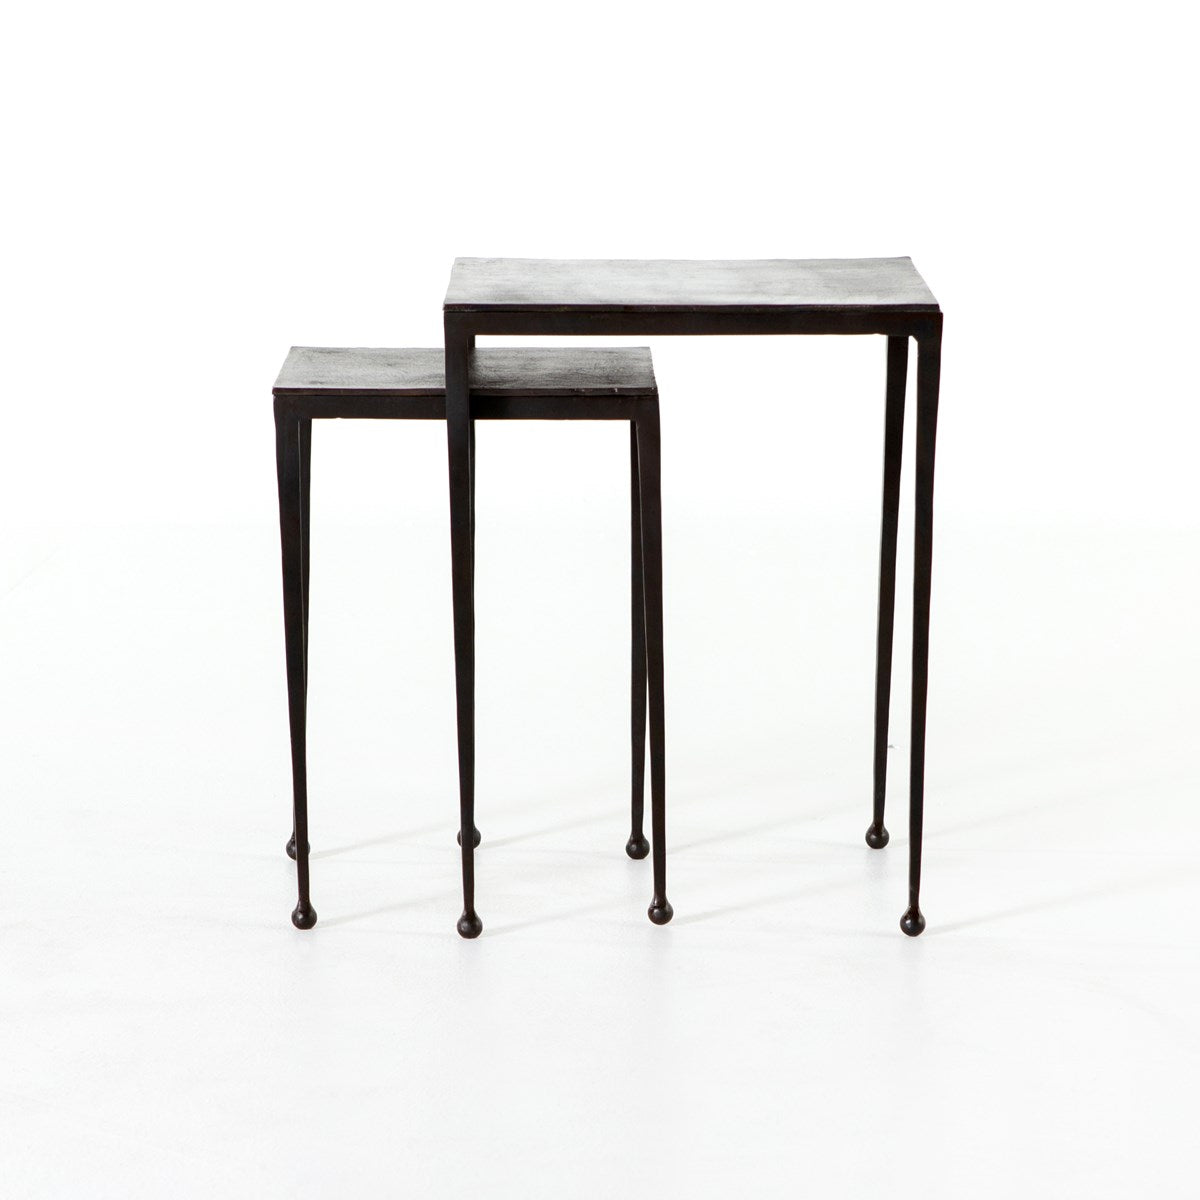 Dalston Nesting End Tables-Antique Rust Table Four Hands     Four Hands, Burke Decor, Mid Century Modern Furniture, Old Bones Furniture Company, Old Bones Co, Modern Mid Century, Designer Furniture, https://www.oldbonesco.com/